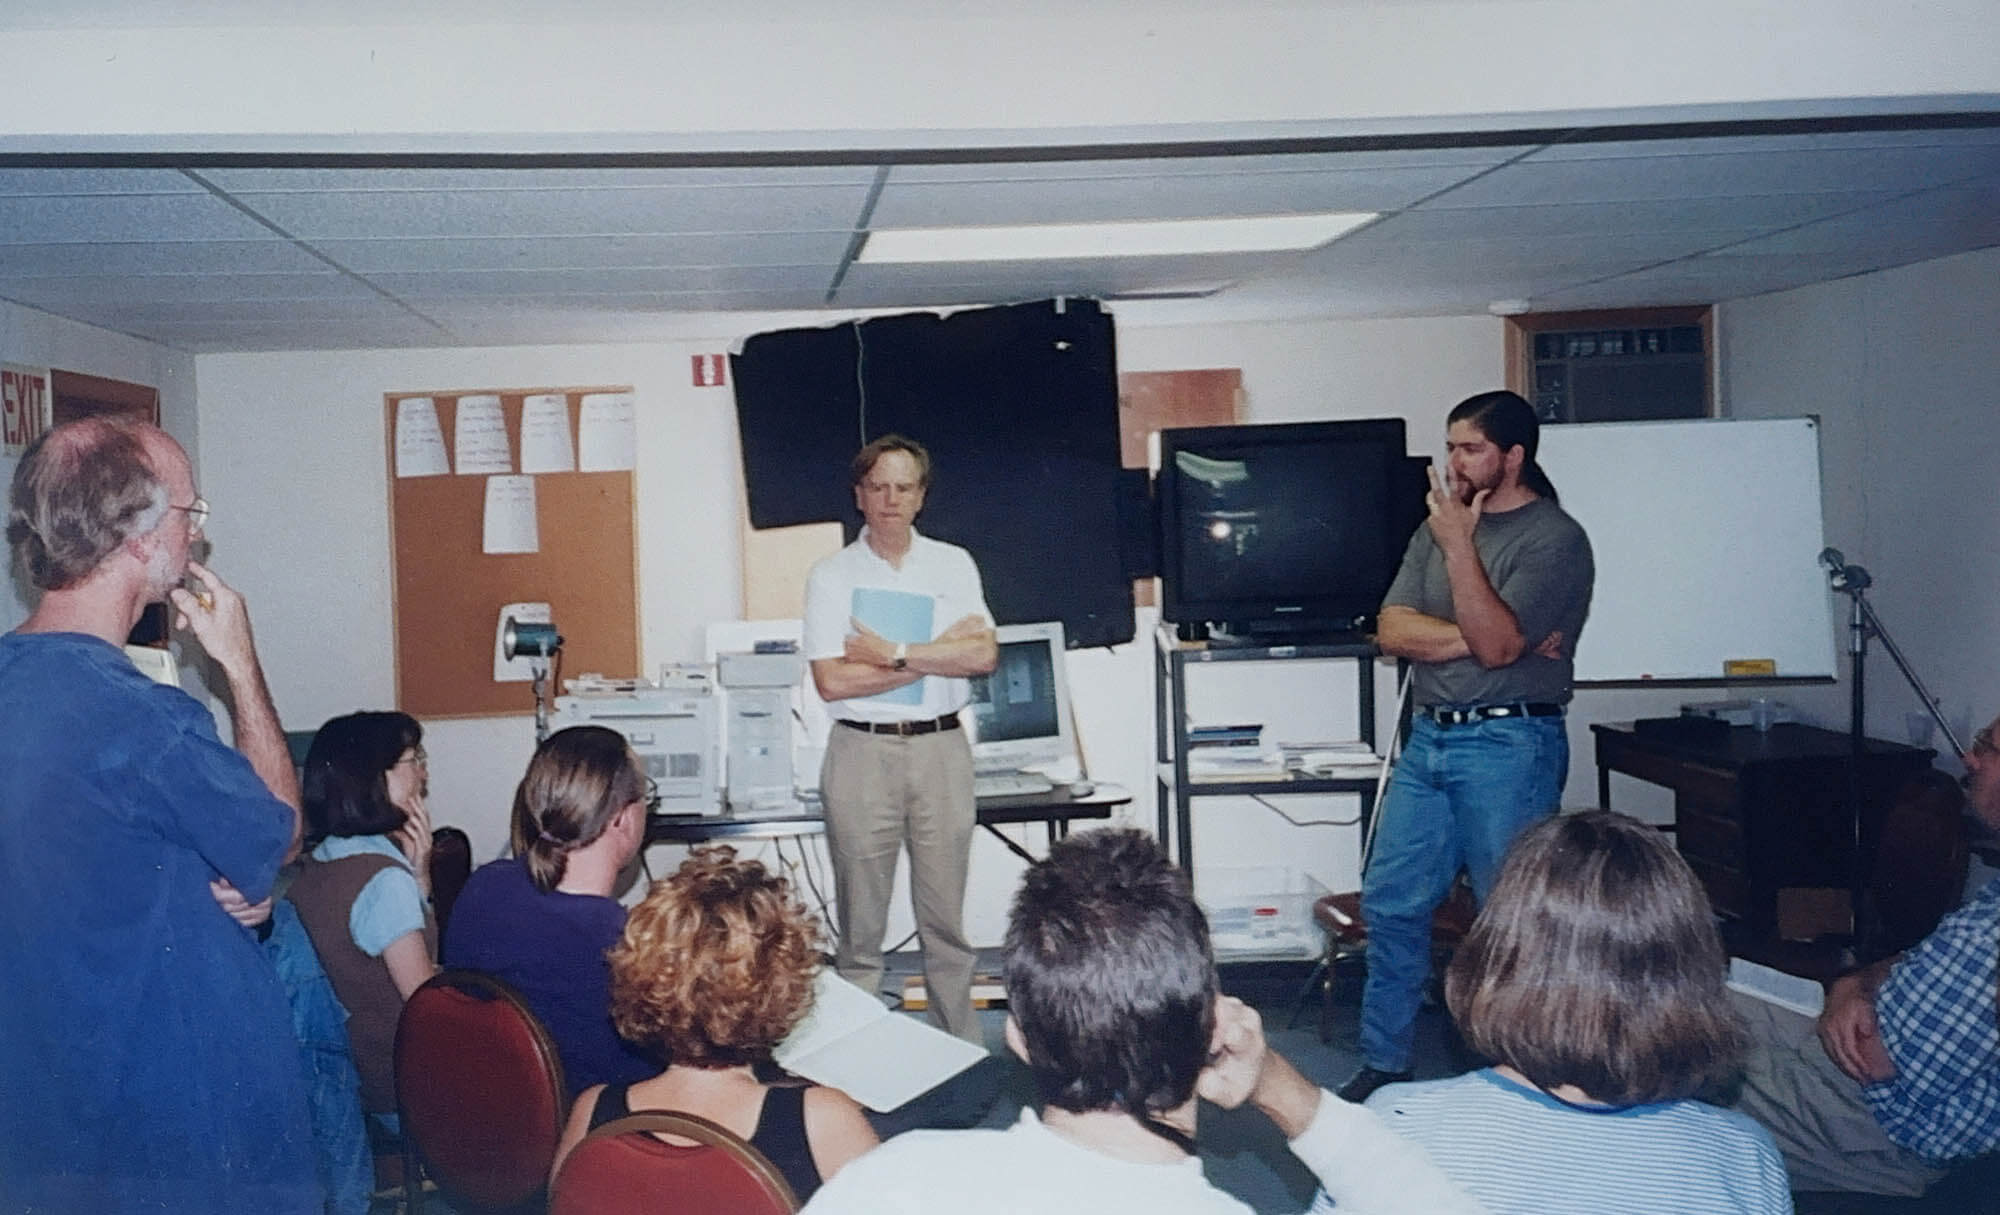 Apple President John Scully and renowned environmental and landscape photographer John Paul Caponigro, a pioneer in digital photography, meet with a class in an early digital classroom.